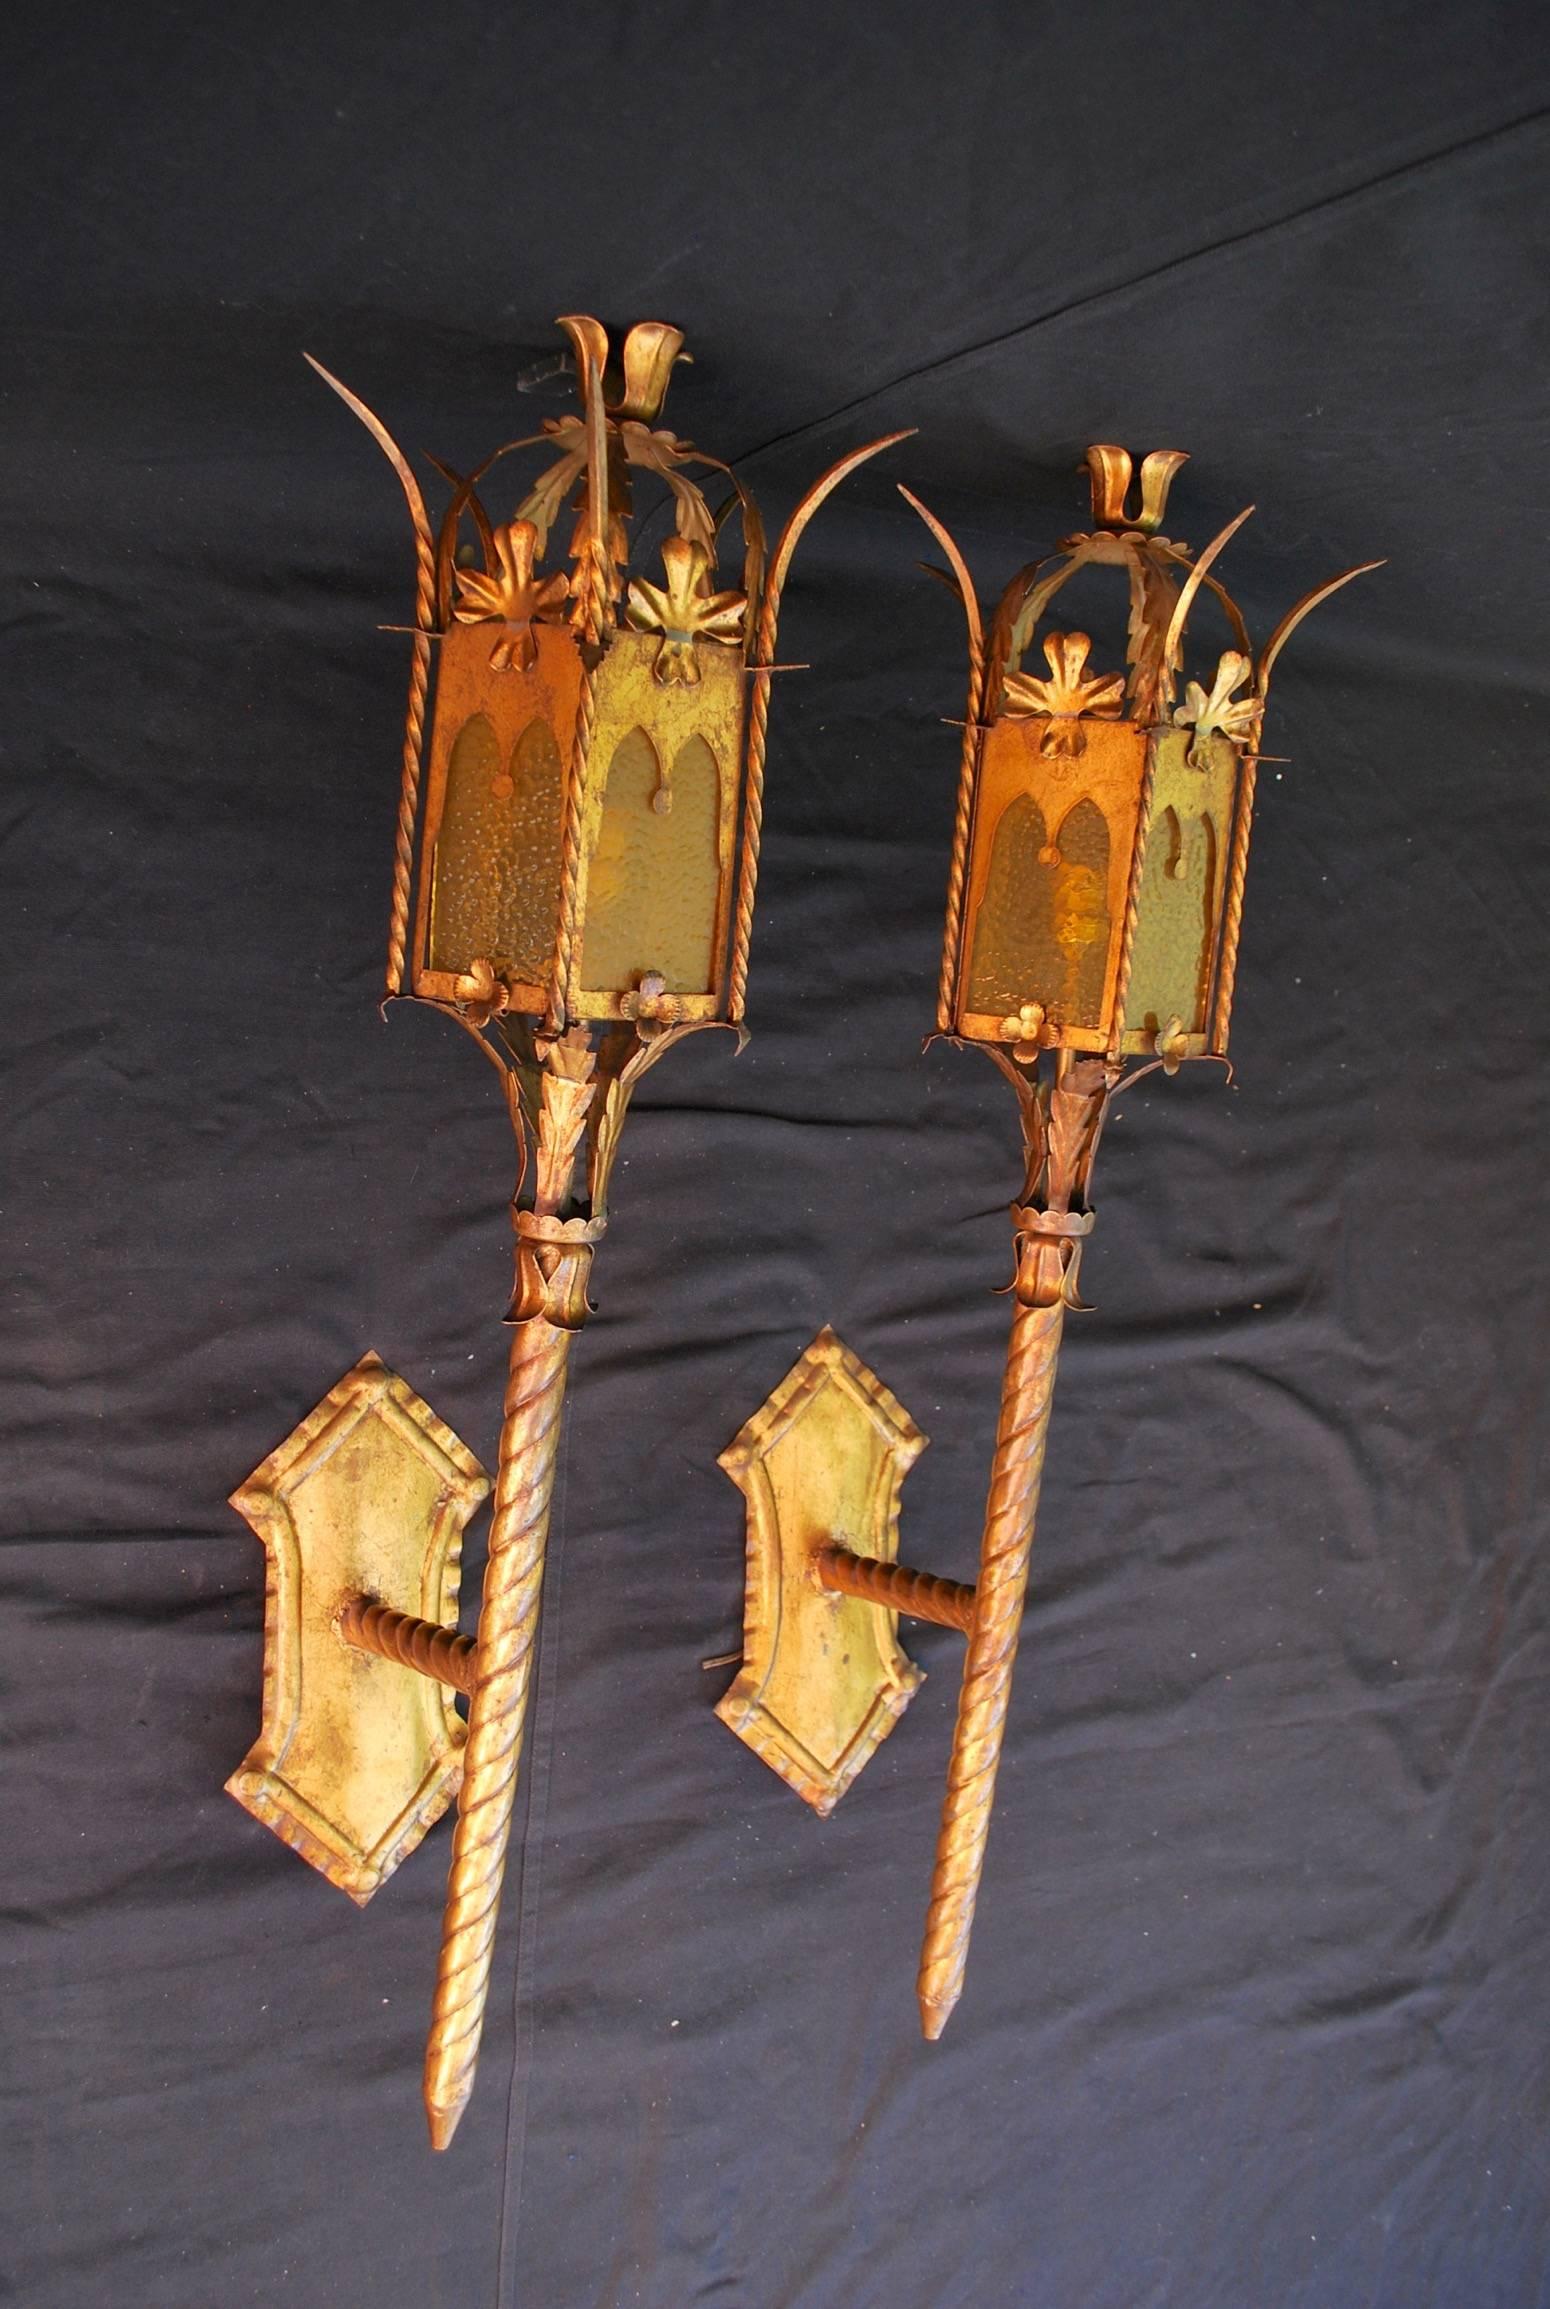 We have over 300 antique sconces and over 1000 antique lights, if you need a specific pair of sconces or lights use the contact dealer button to ask us, we might have it in our store
We also have our own line of wrought iron reproduction sconces